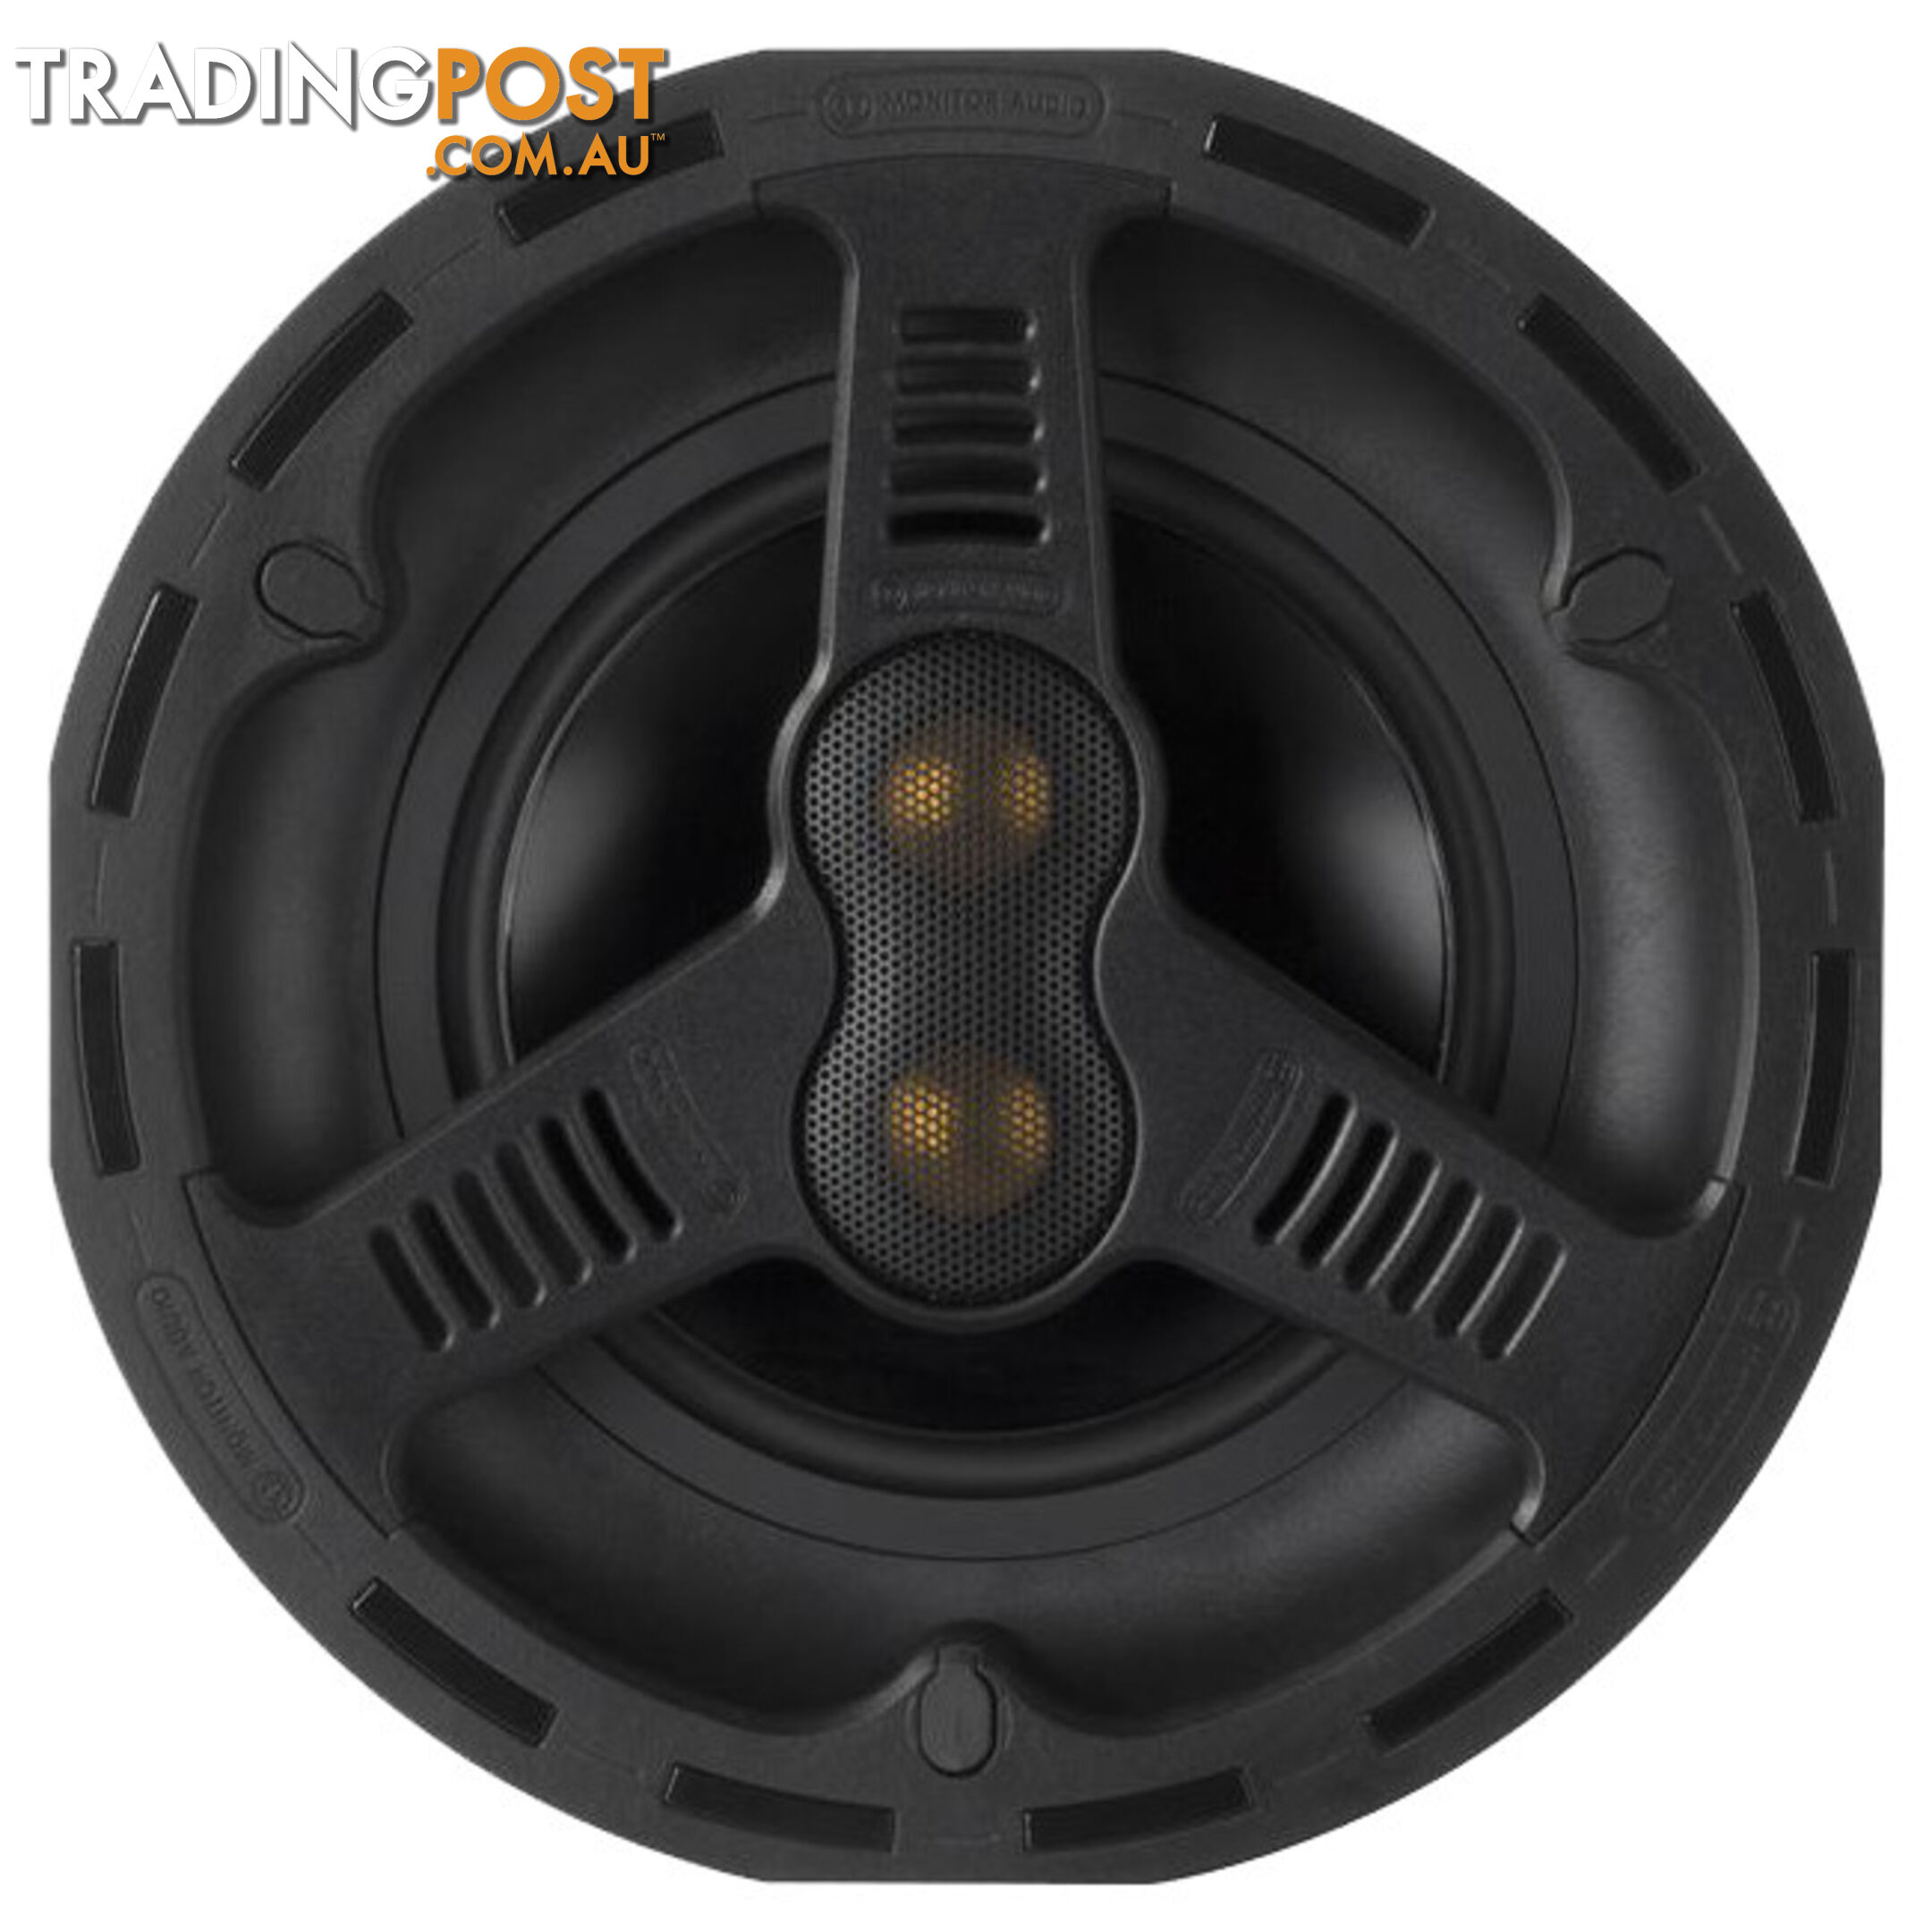 AWC265T2 SINGLE STEREO 6.5" ALL WEATHER CEILING SPEAKER